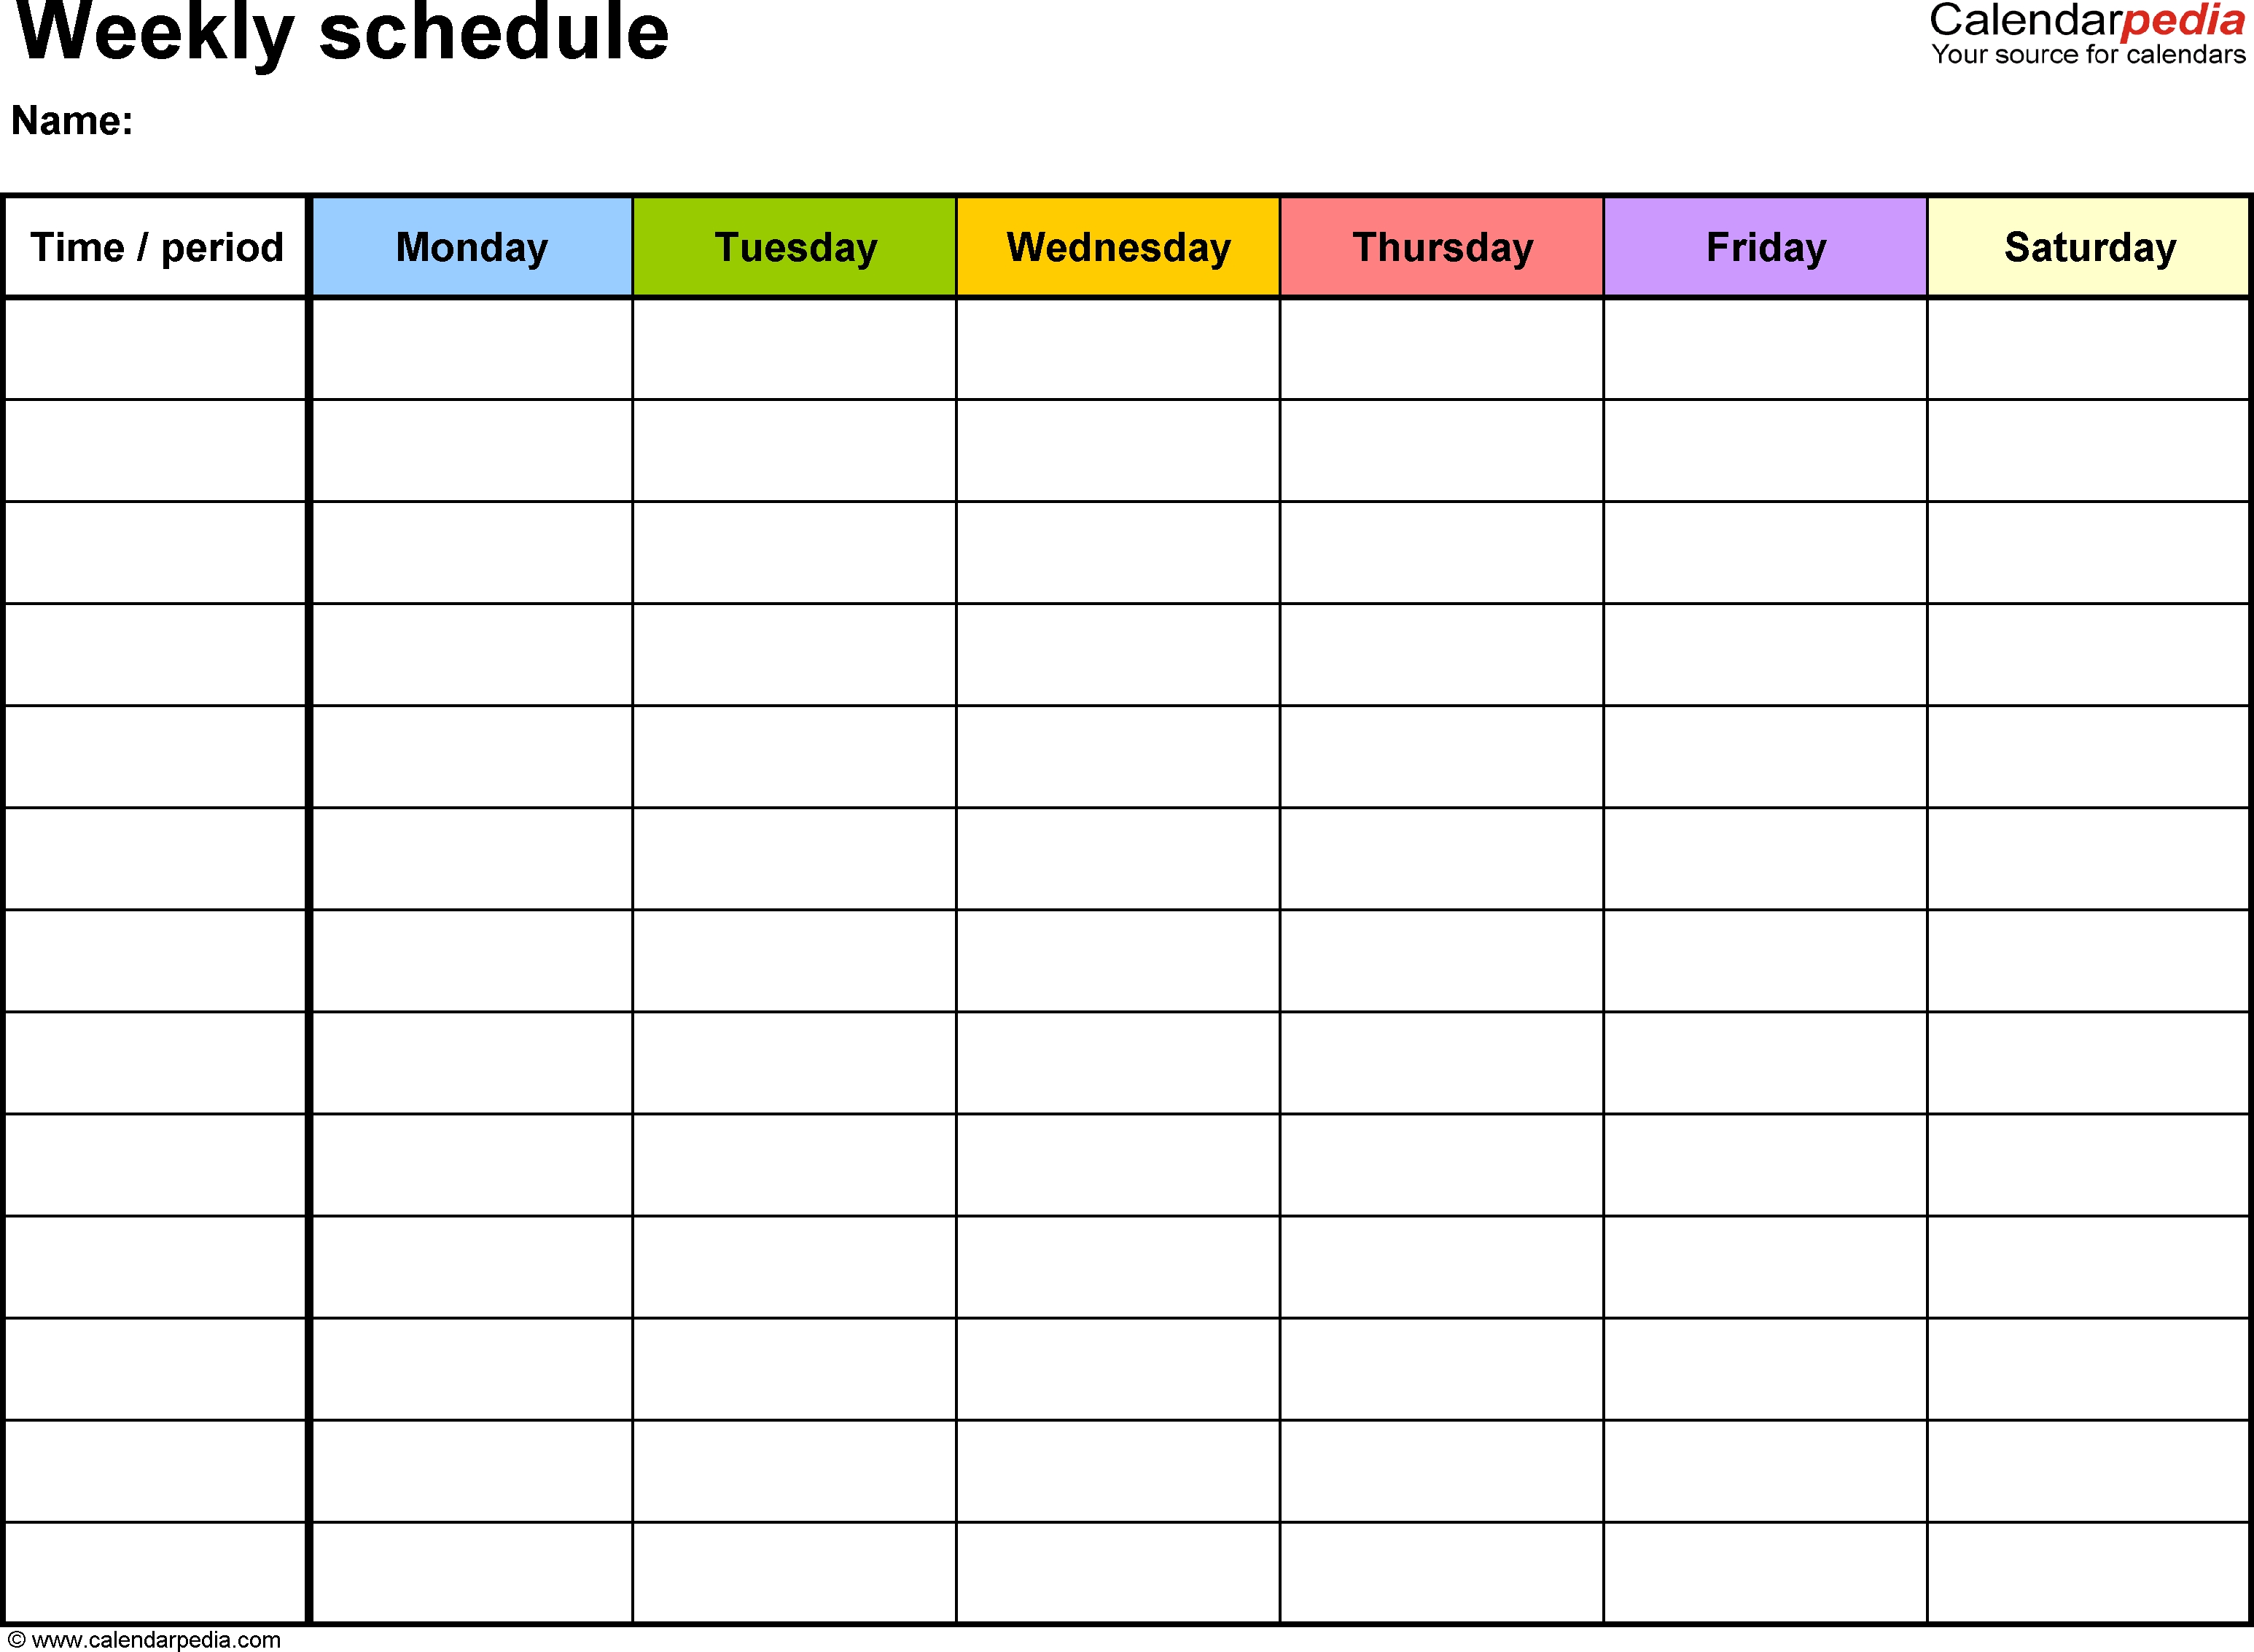 Free Weekly Schedule Templates For Word - 18 Templates-Monday To Sunday Monthly Planners